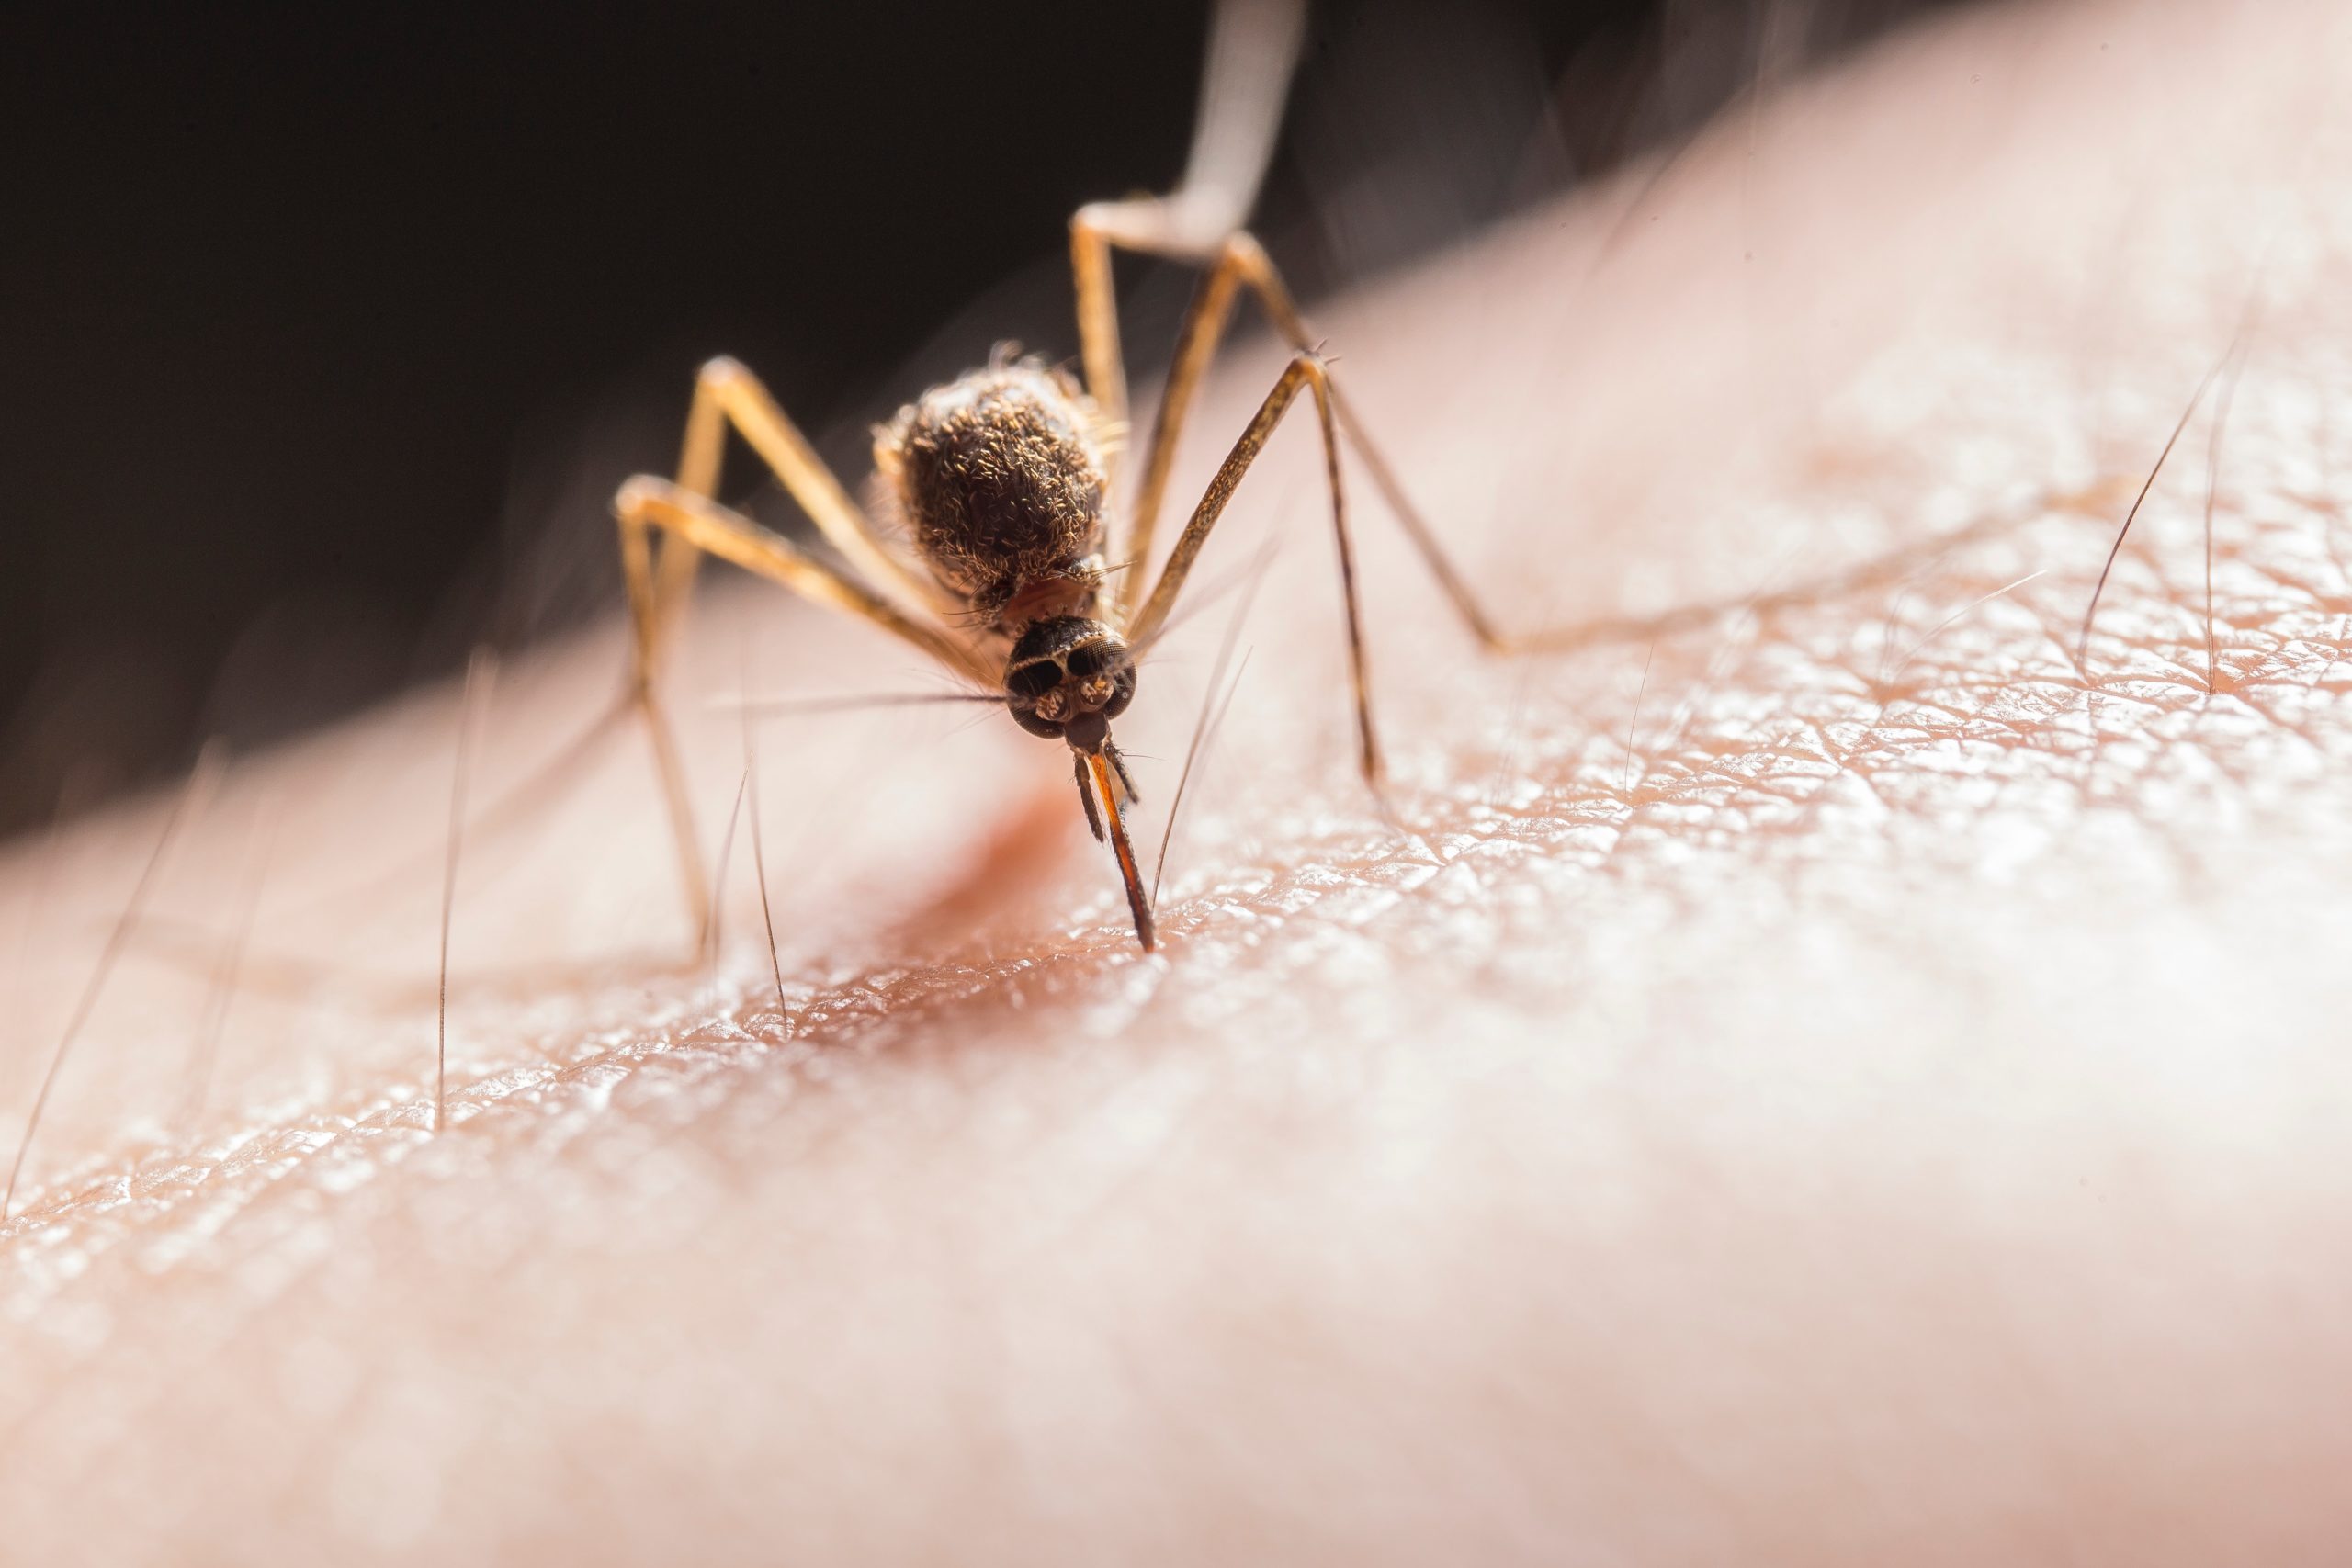 Can a mosquito bite you over your pants? - Quora